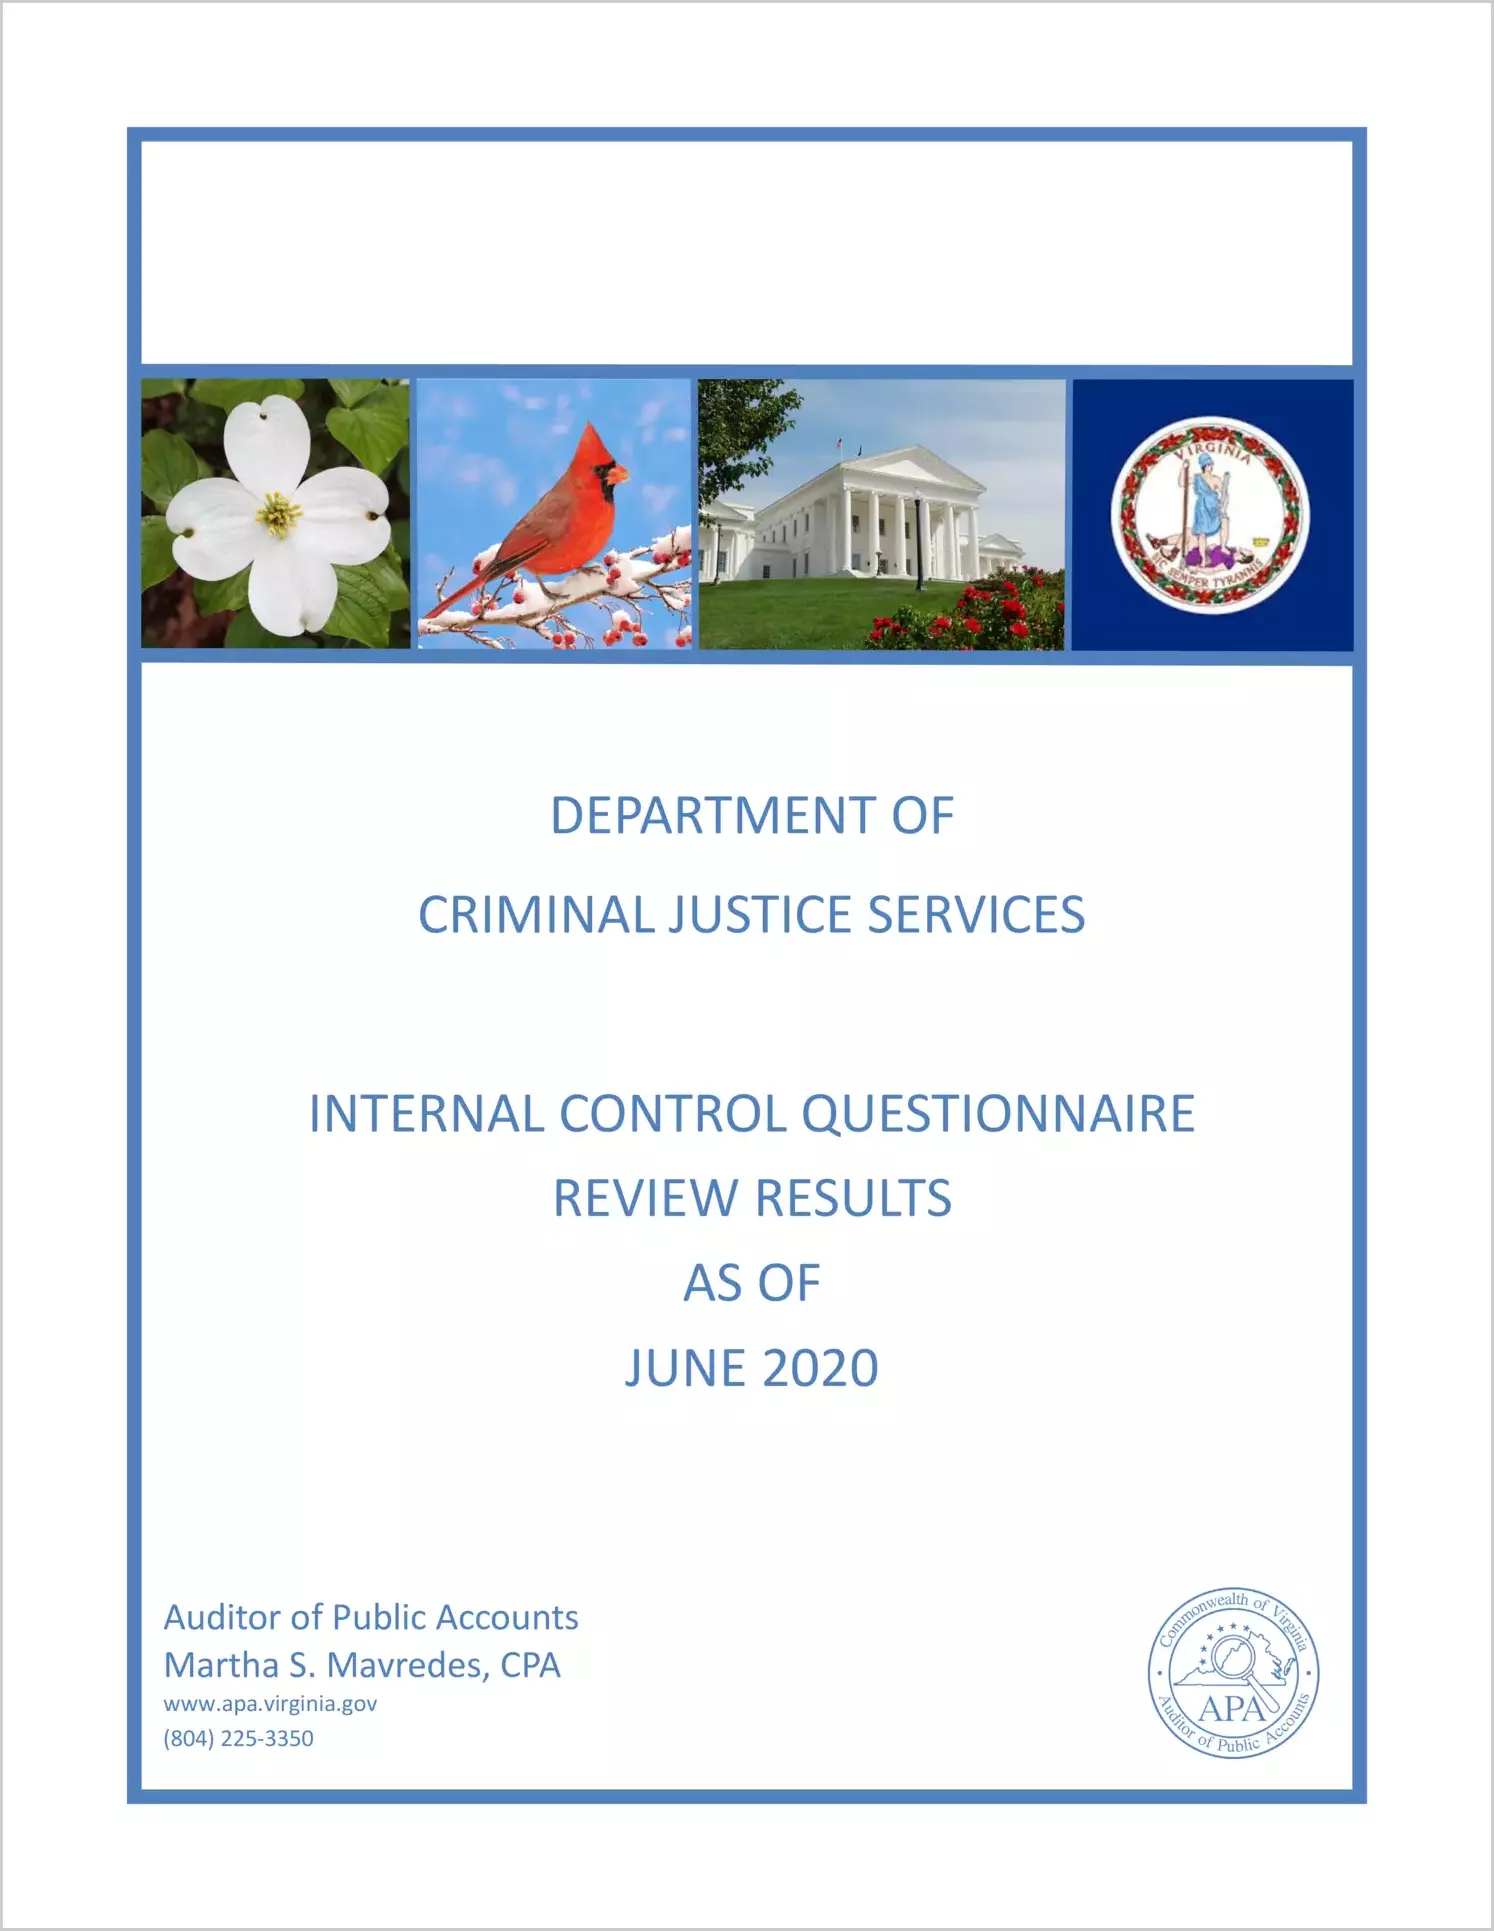 Department of Criminal Justice Services Internal Control Questionnaire Review Results as of June 2020